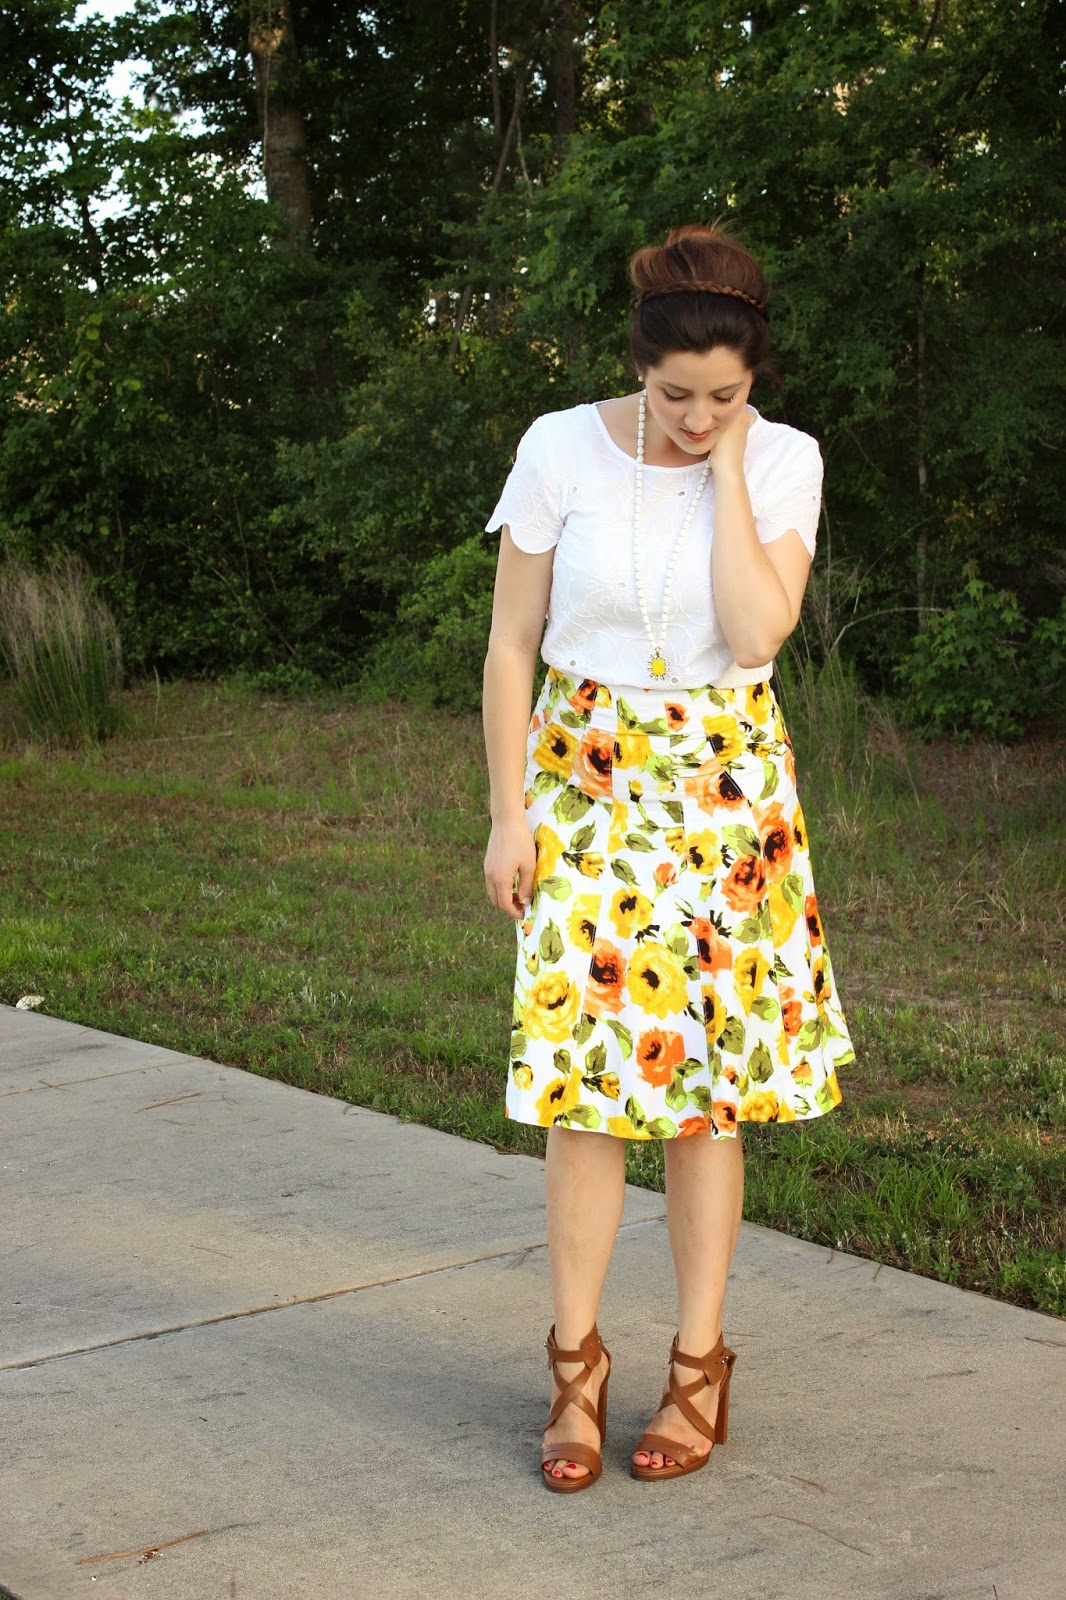 Sweet Sunlight Style: Florals and Heels